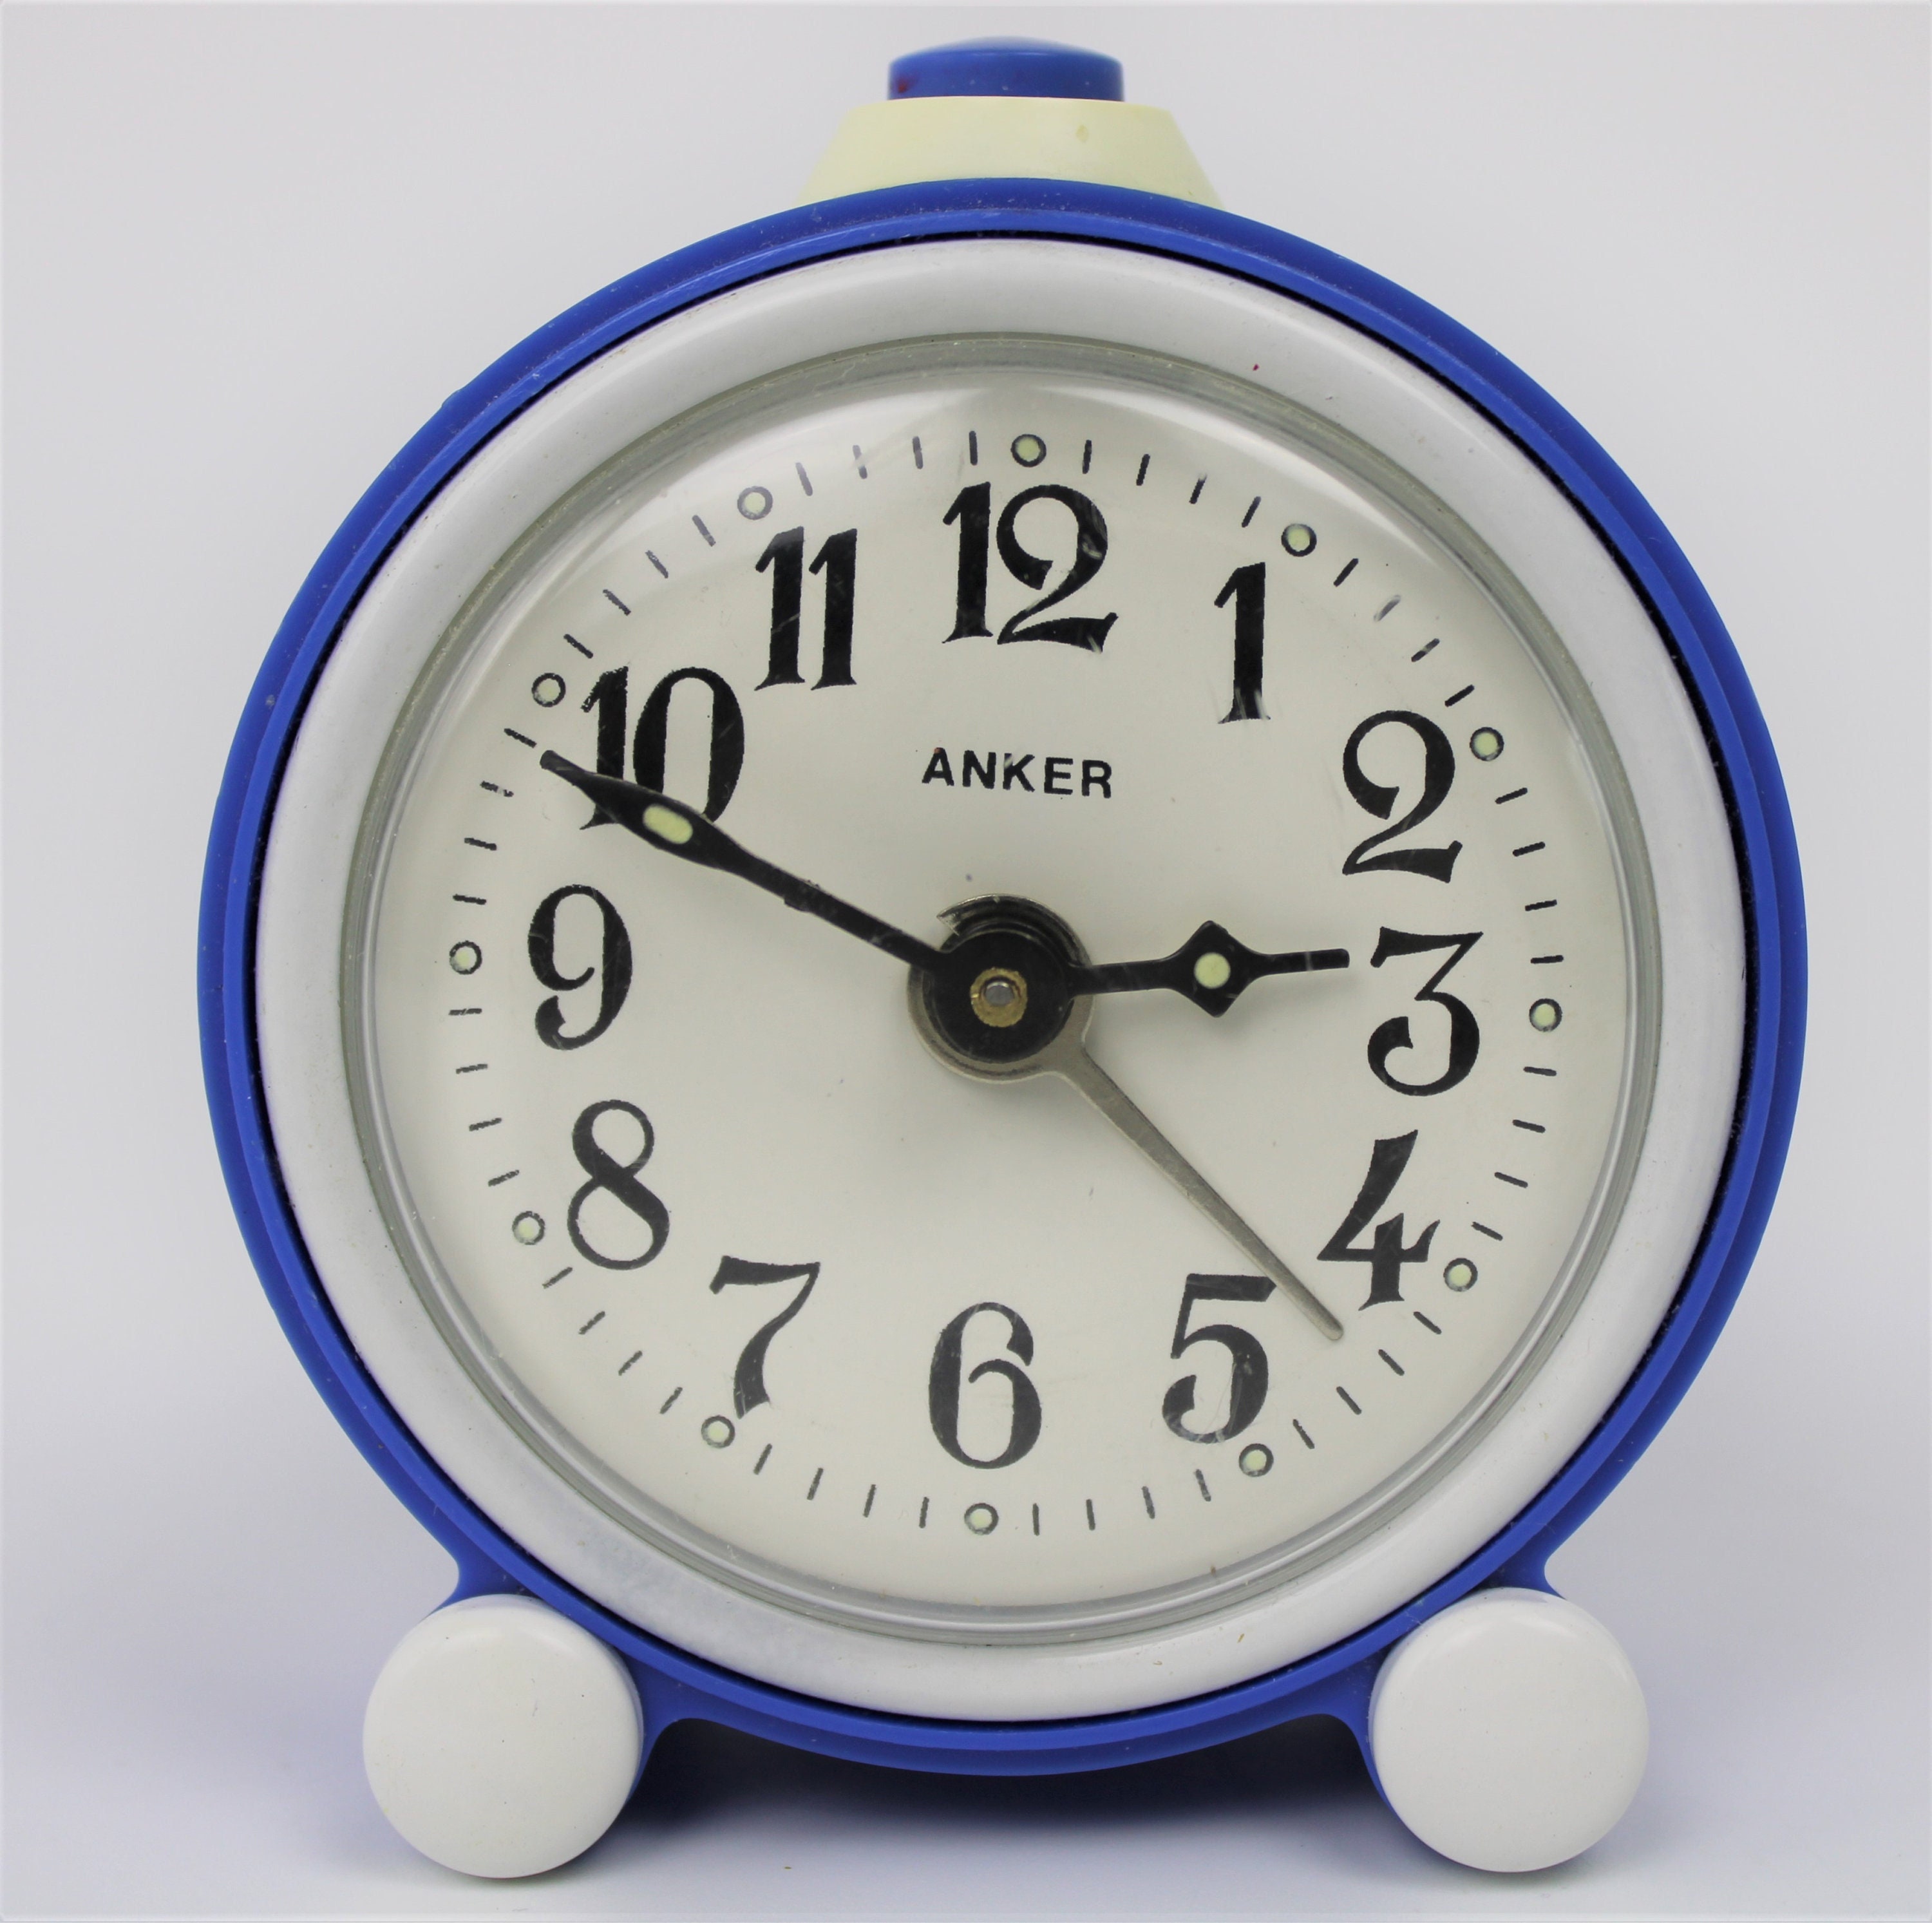 Vintage Alarm Clock From the -